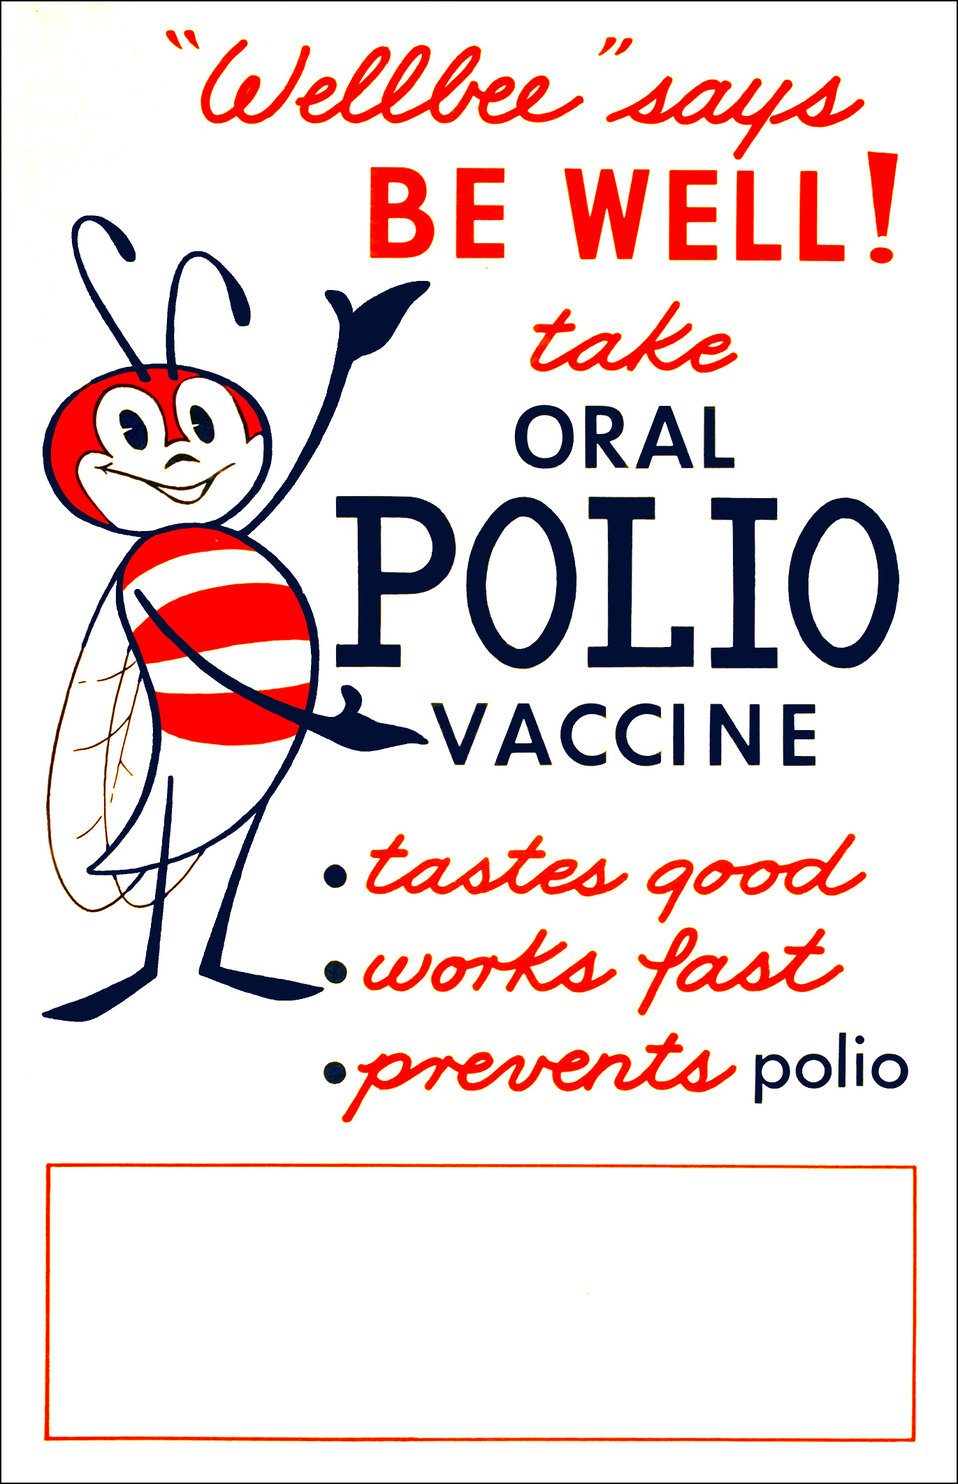 This 1963 poster featured the Well Bee, the CDC’s symbol for public health, encouraging Americans to take the oral polio vaccine. 